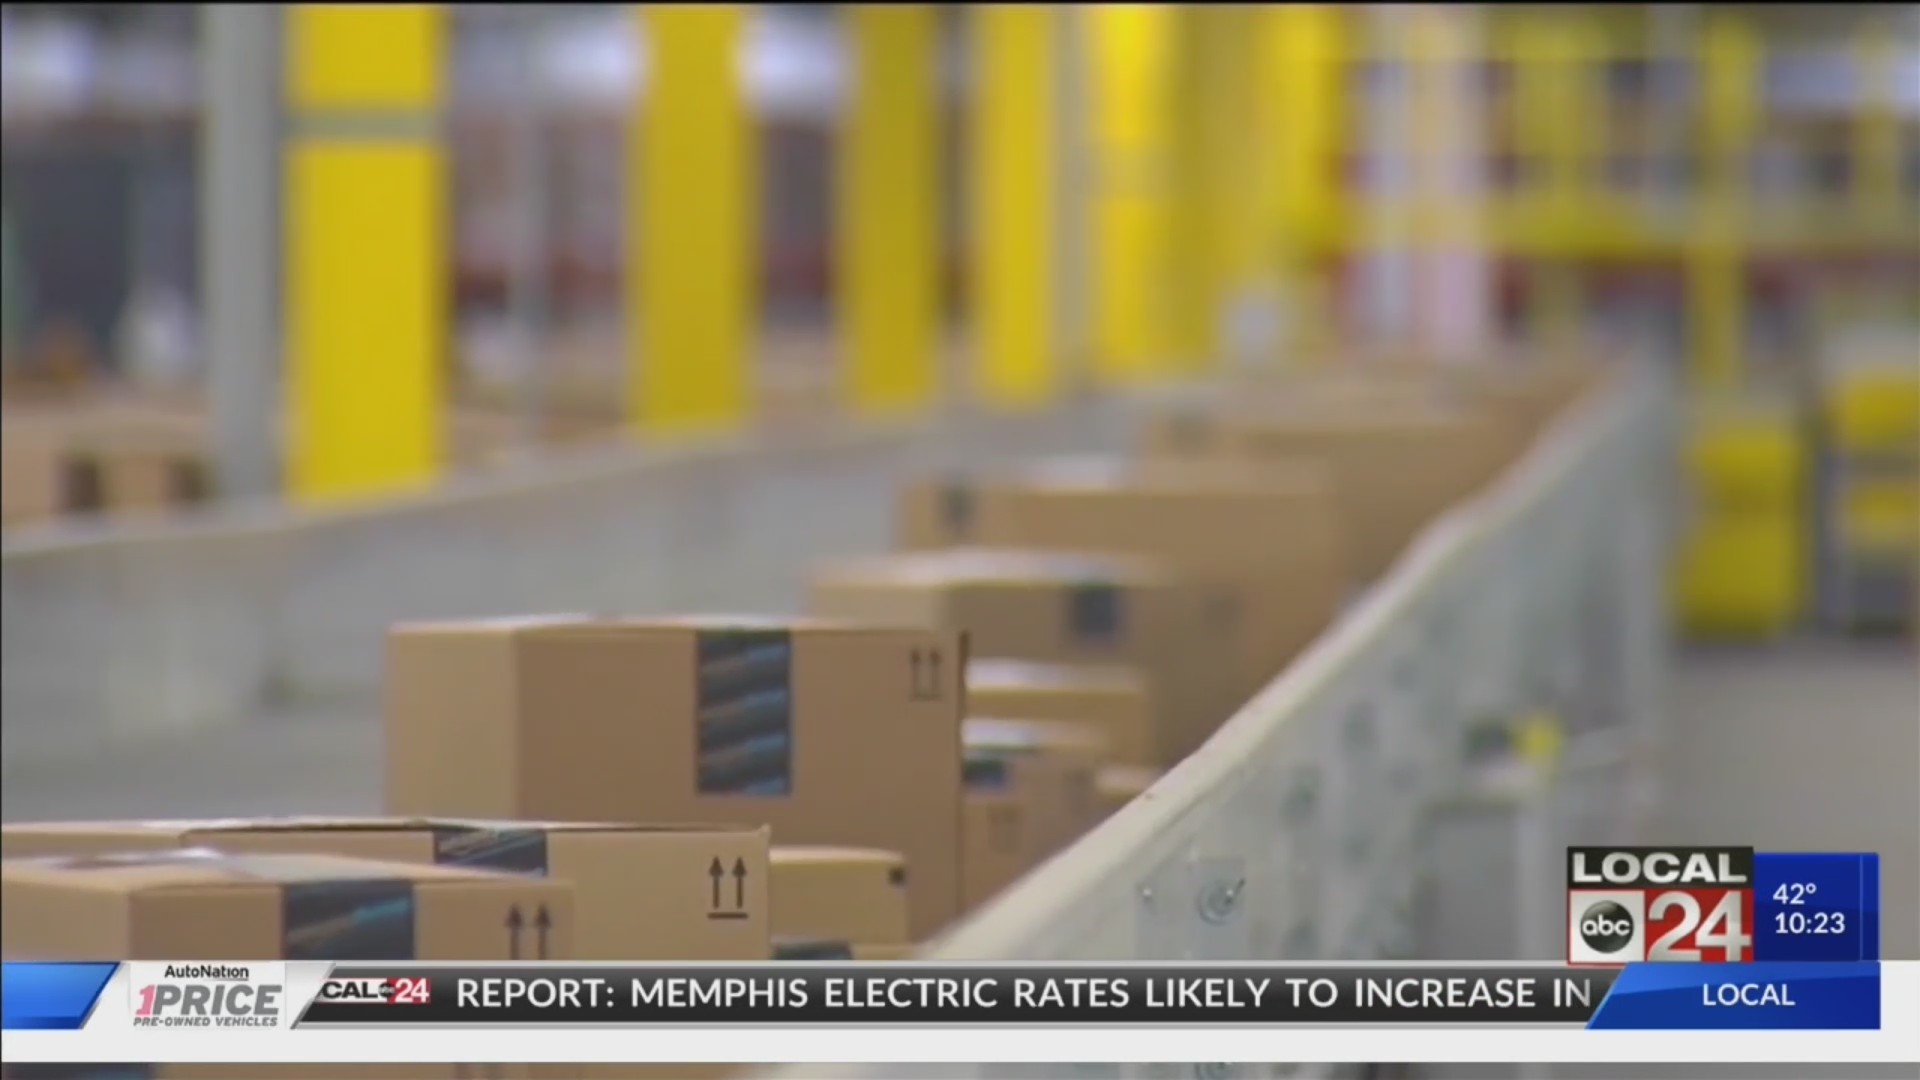 Amazon is going big, really big, in Memphis with “Project Iris”